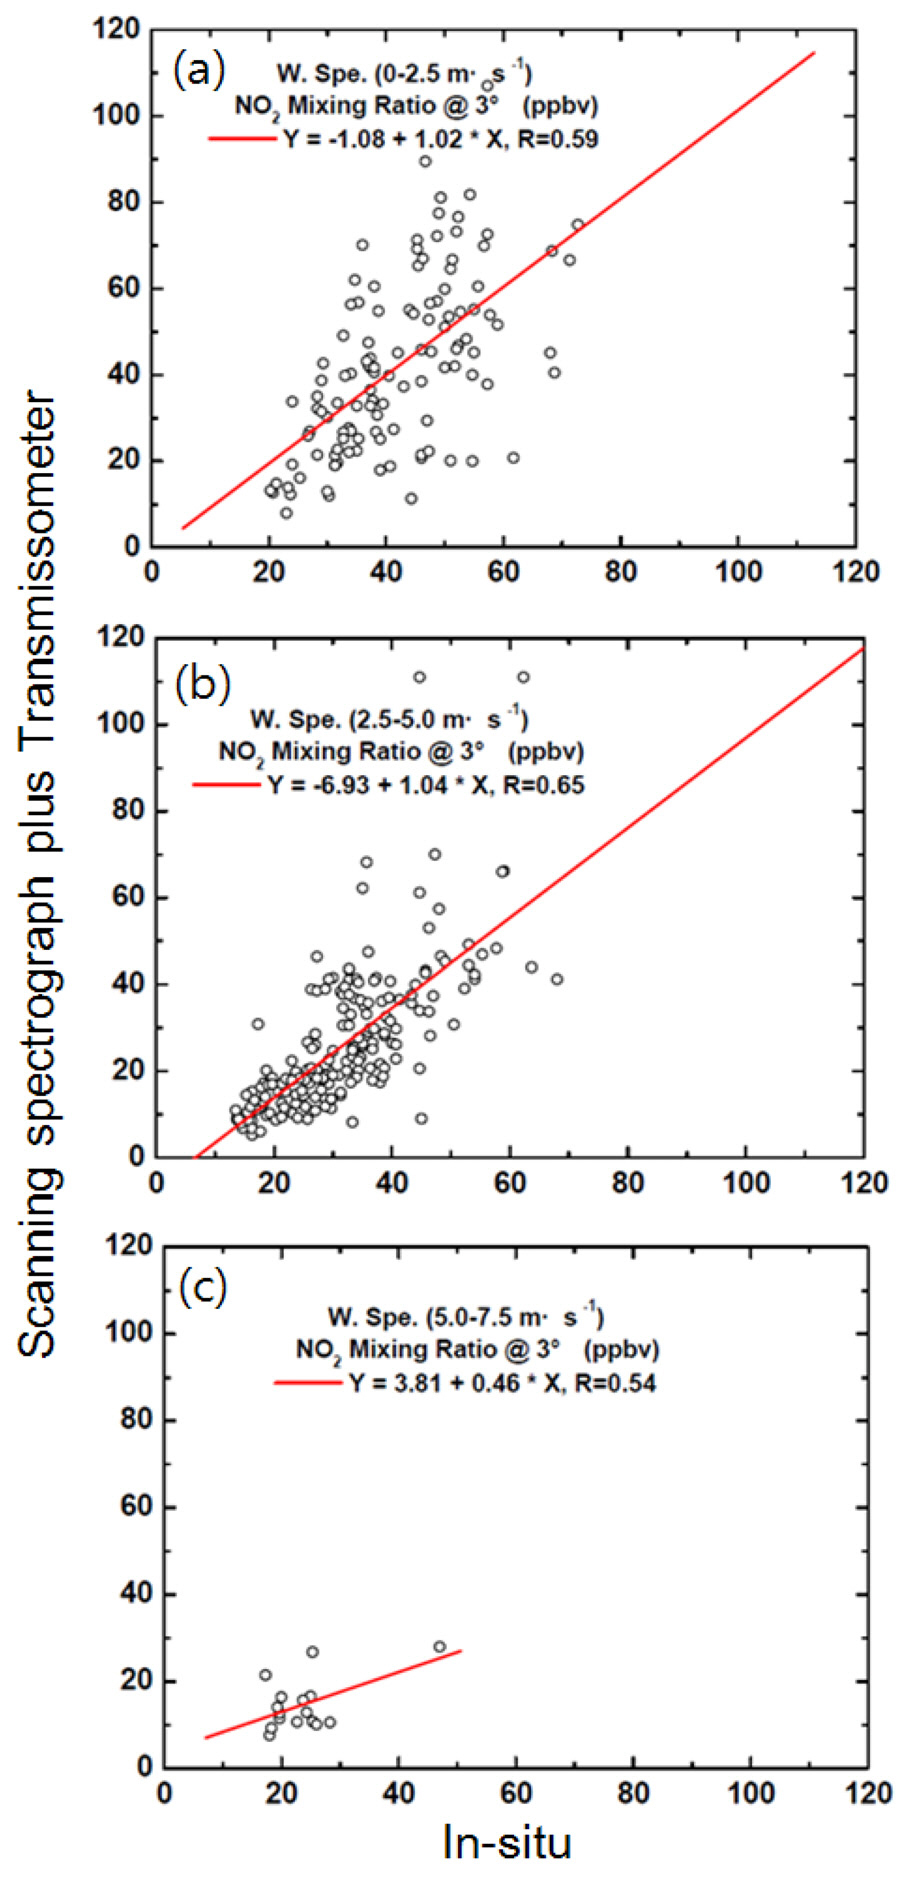 Correlation between NO2 volume mixing ratios derived by simultaneous measurements using a scanning spectrograph system and a transmissometer and those measured using an in situ chemiluminescence monitor at Gwangju for conditions of (a) calm wind (wind speed < 2.5 ms?1) (b) moderate wind (2.5?5.0 m s?1) and (c) strong wind (5.0?7.5 m s-1) during the measurement period (1 May to 4 June 2009).